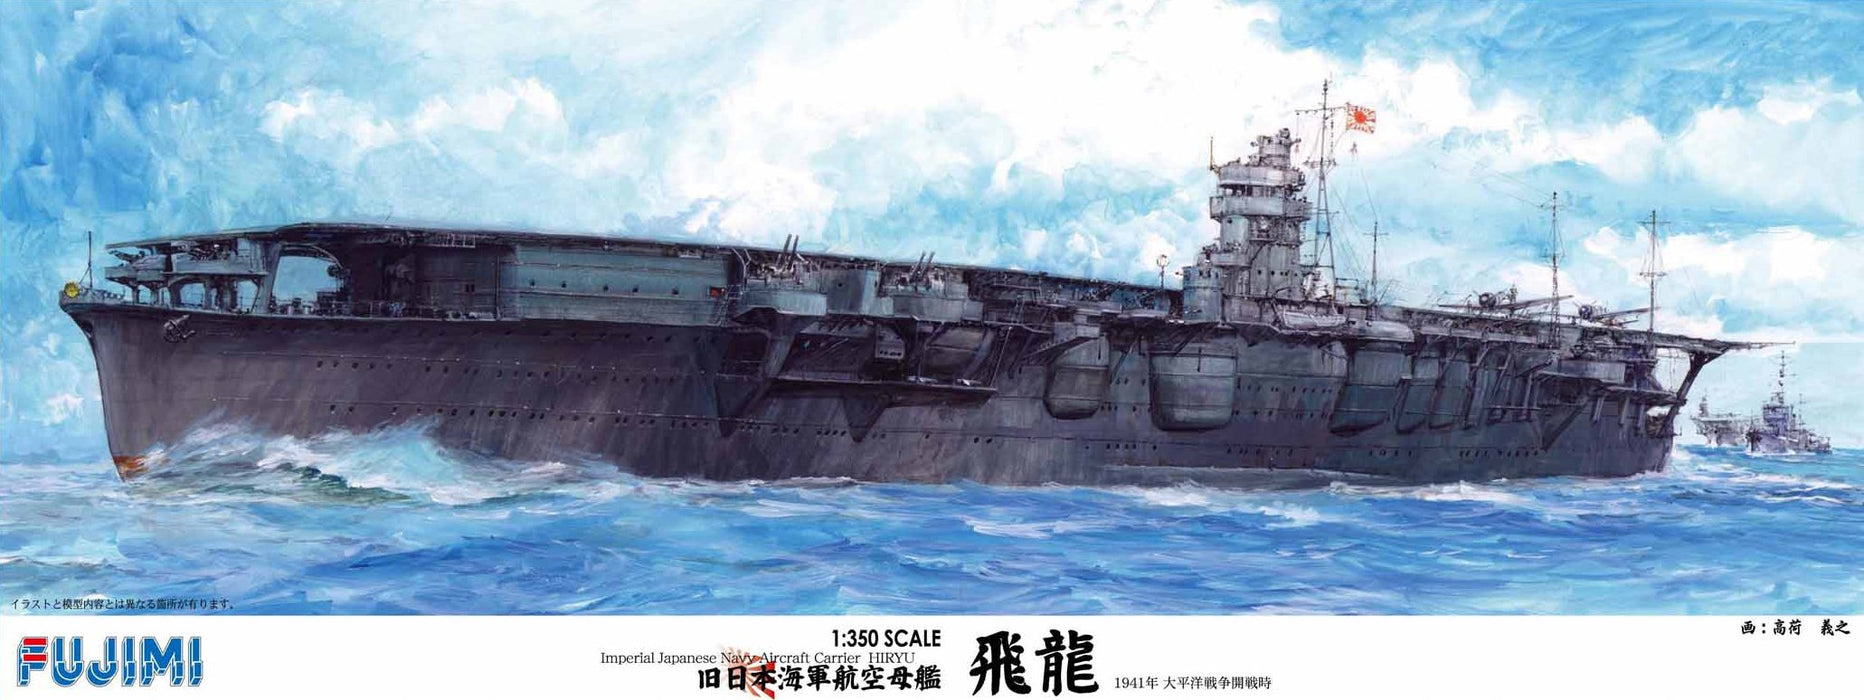 Fujimi Model 1/350 Ship Series Former Imperial Japanese Navy Aircraft Carrier Hiryu Dx